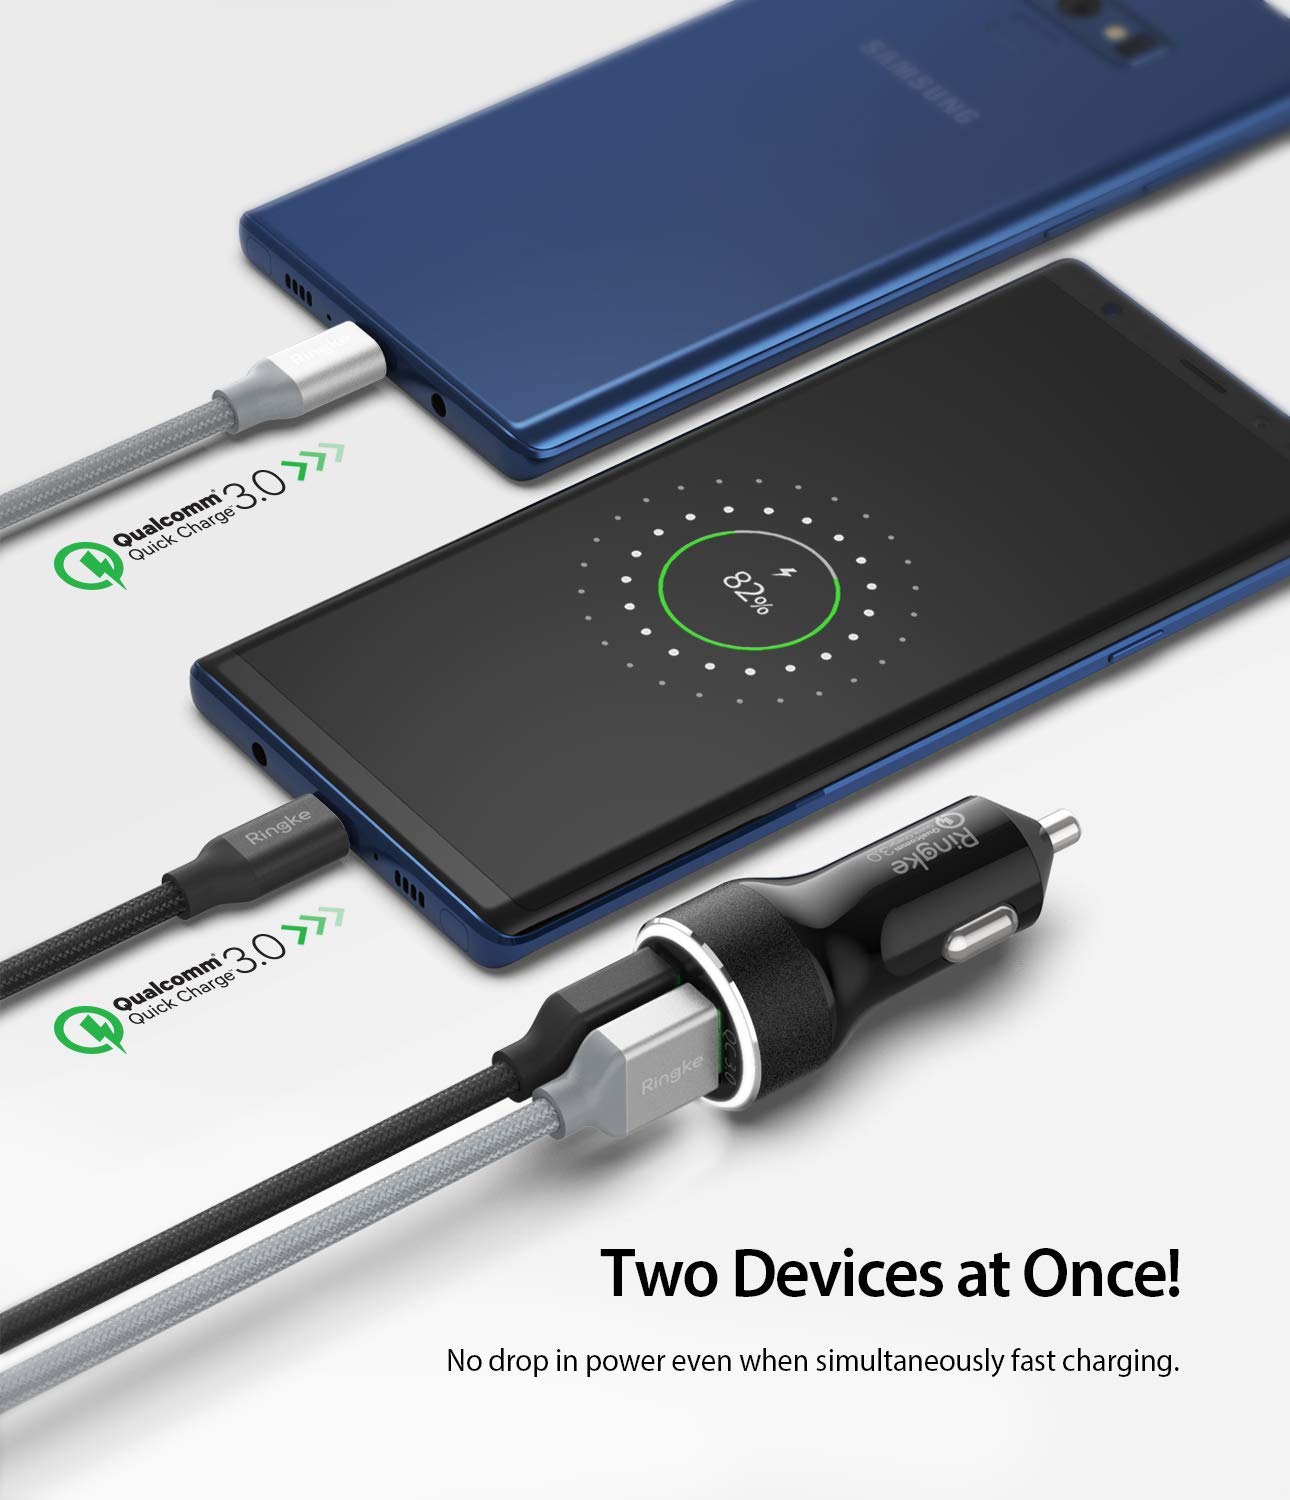 ringke realx2 quick charge 3.0 charge up to two devices at once